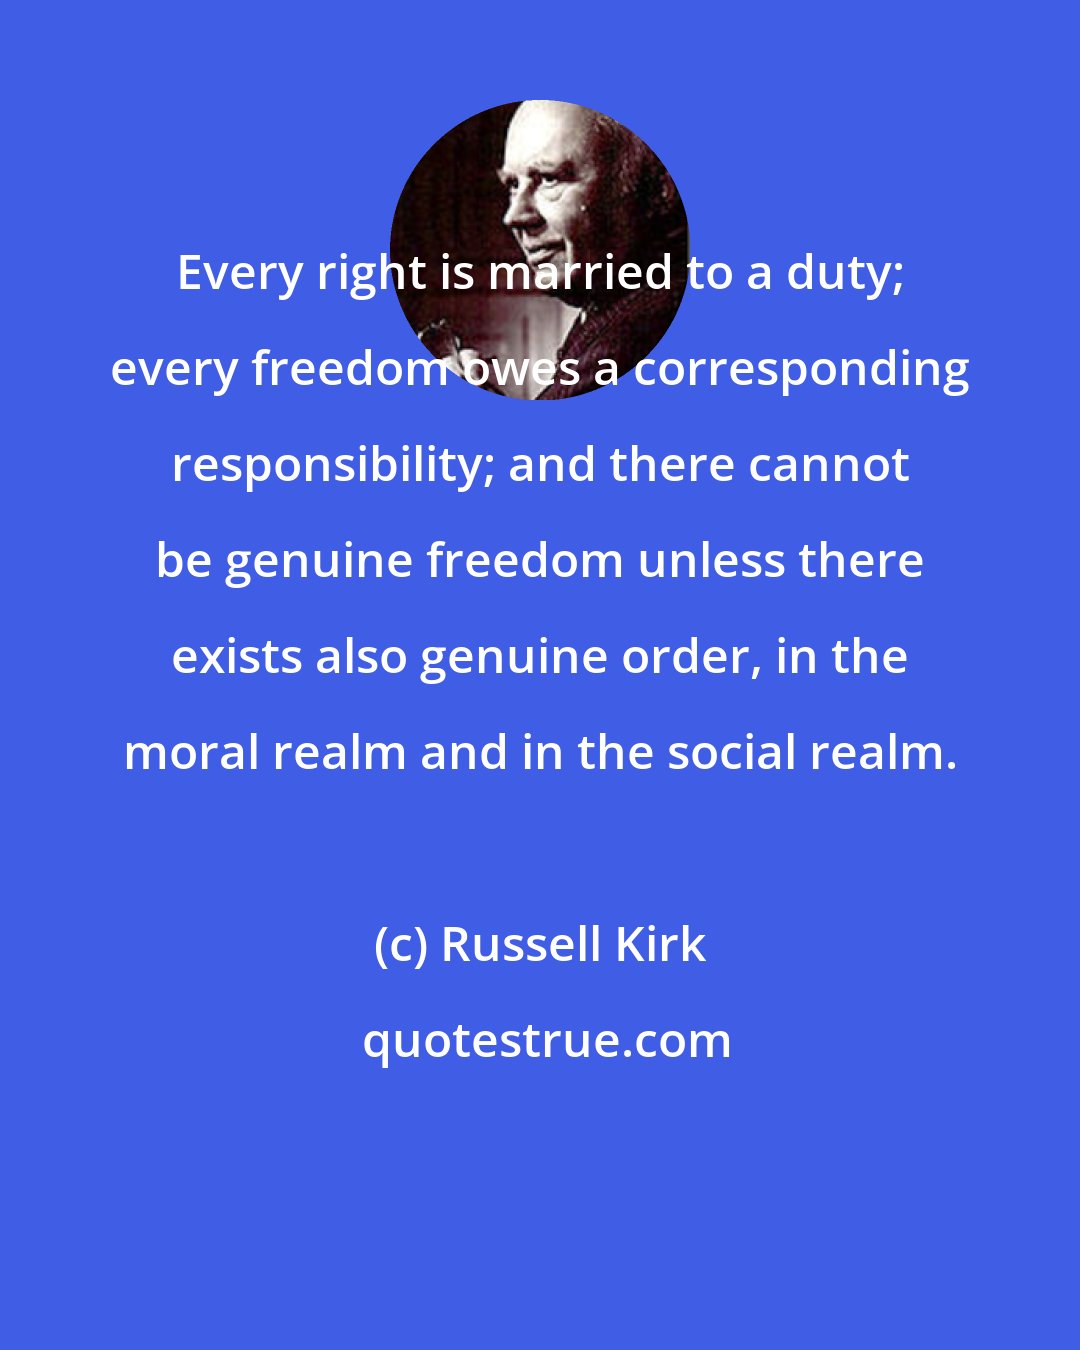 Russell Kirk: Every right is married to a duty; every freedom owes a corresponding responsibility; and there cannot be genuine freedom unless there exists also genuine order, in the moral realm and in the social realm.